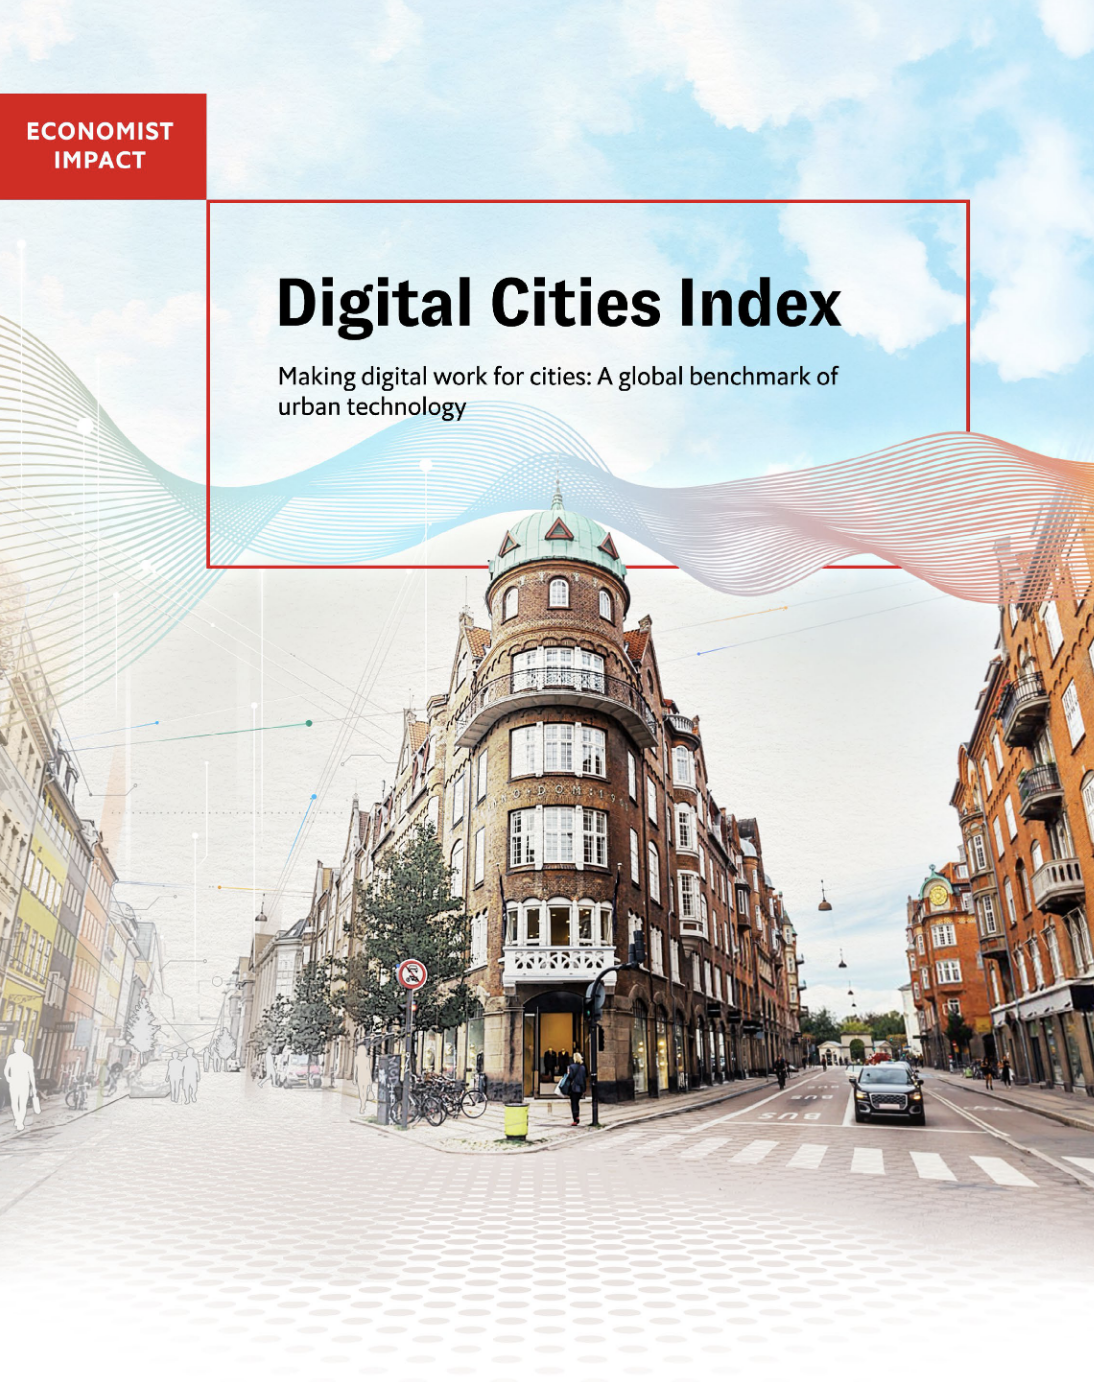 Digital Cities Index: The Shift From Optimization to Engagement